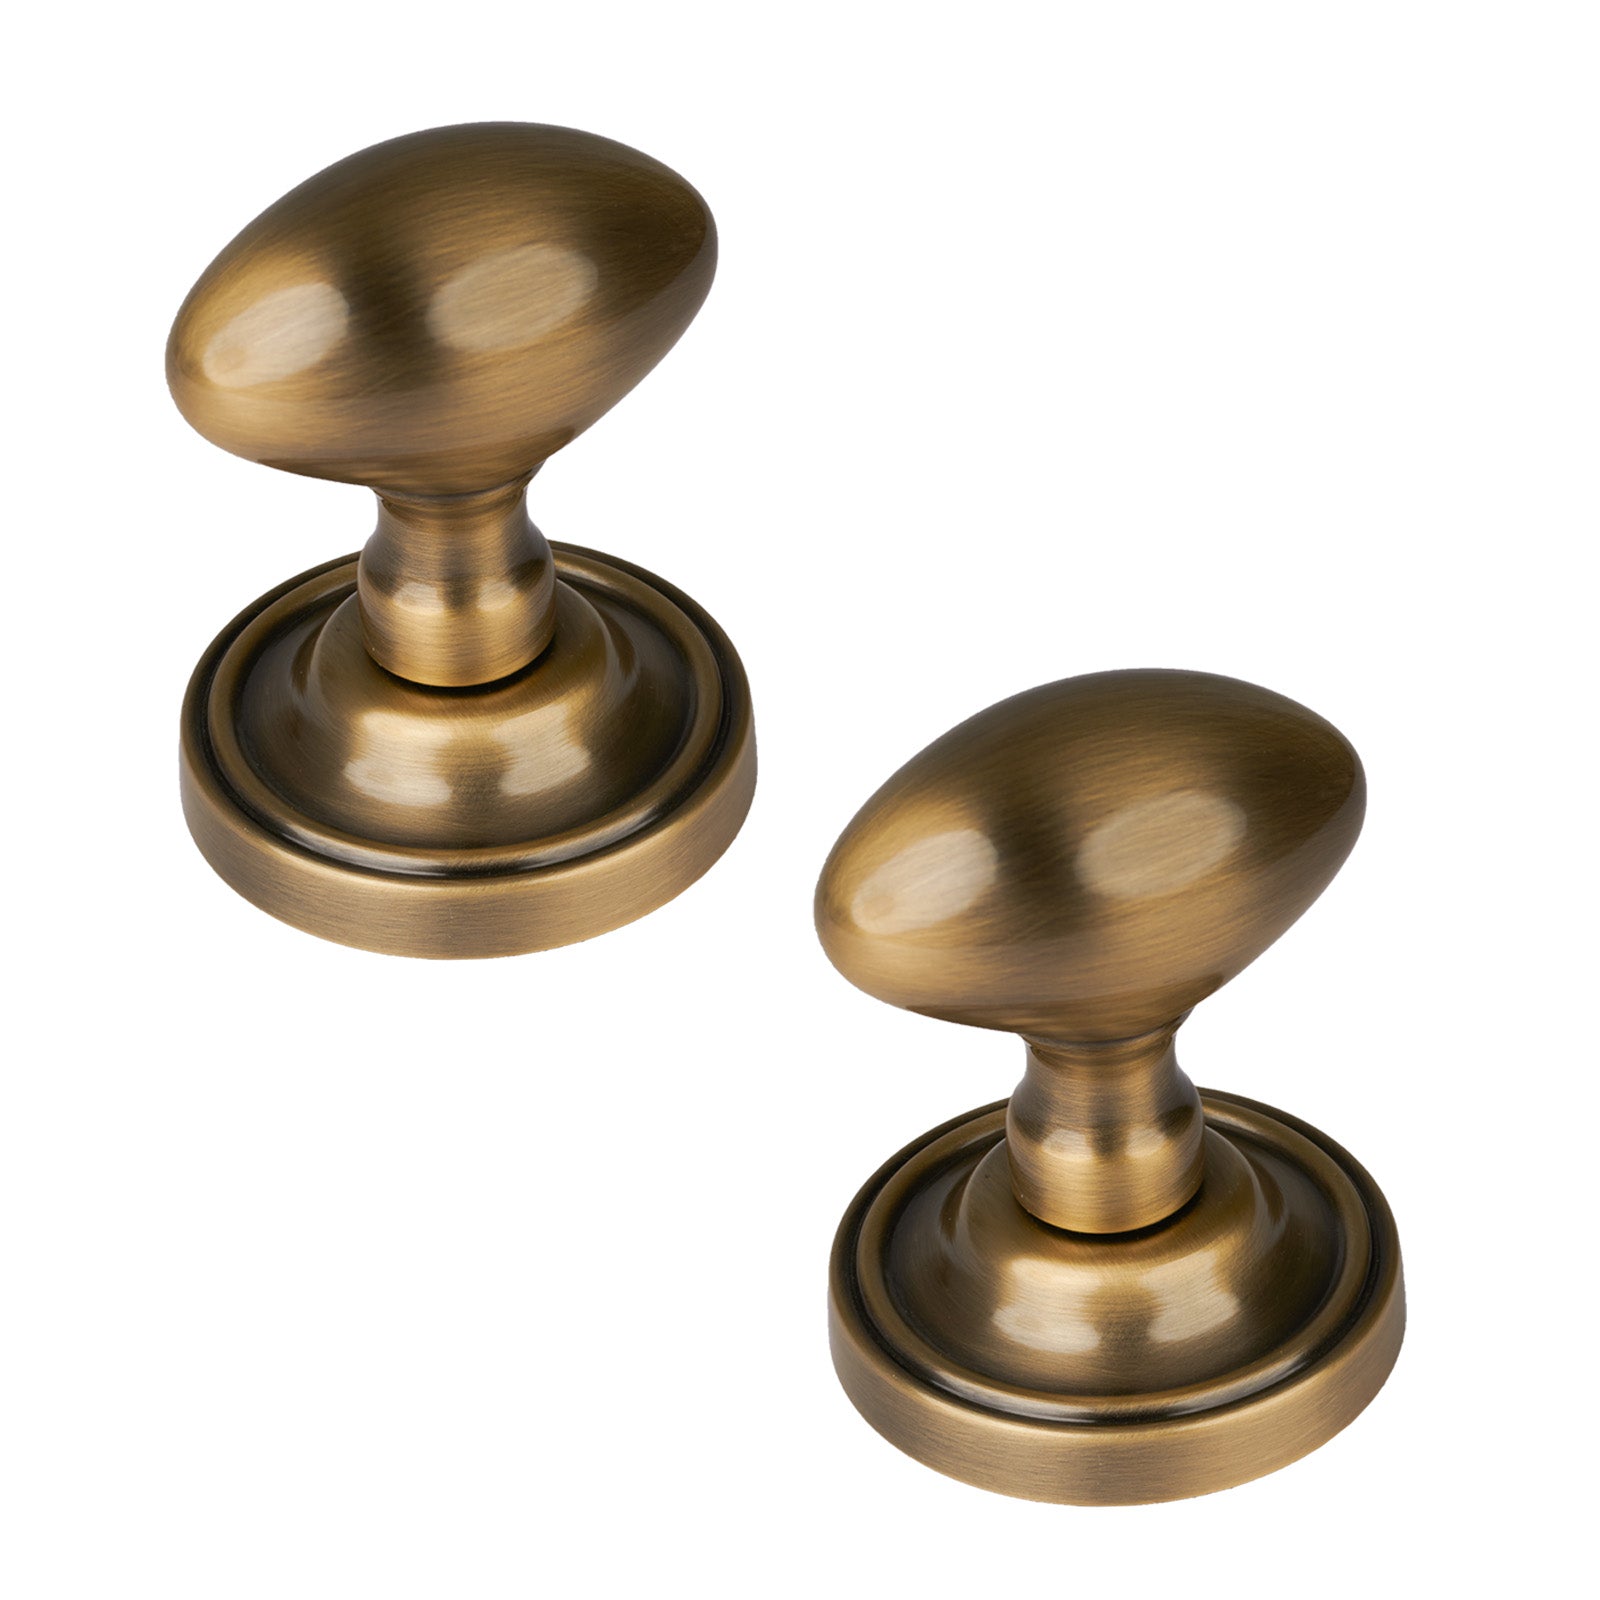 Chelsea Door Knob on Rose in Aged Brass finish